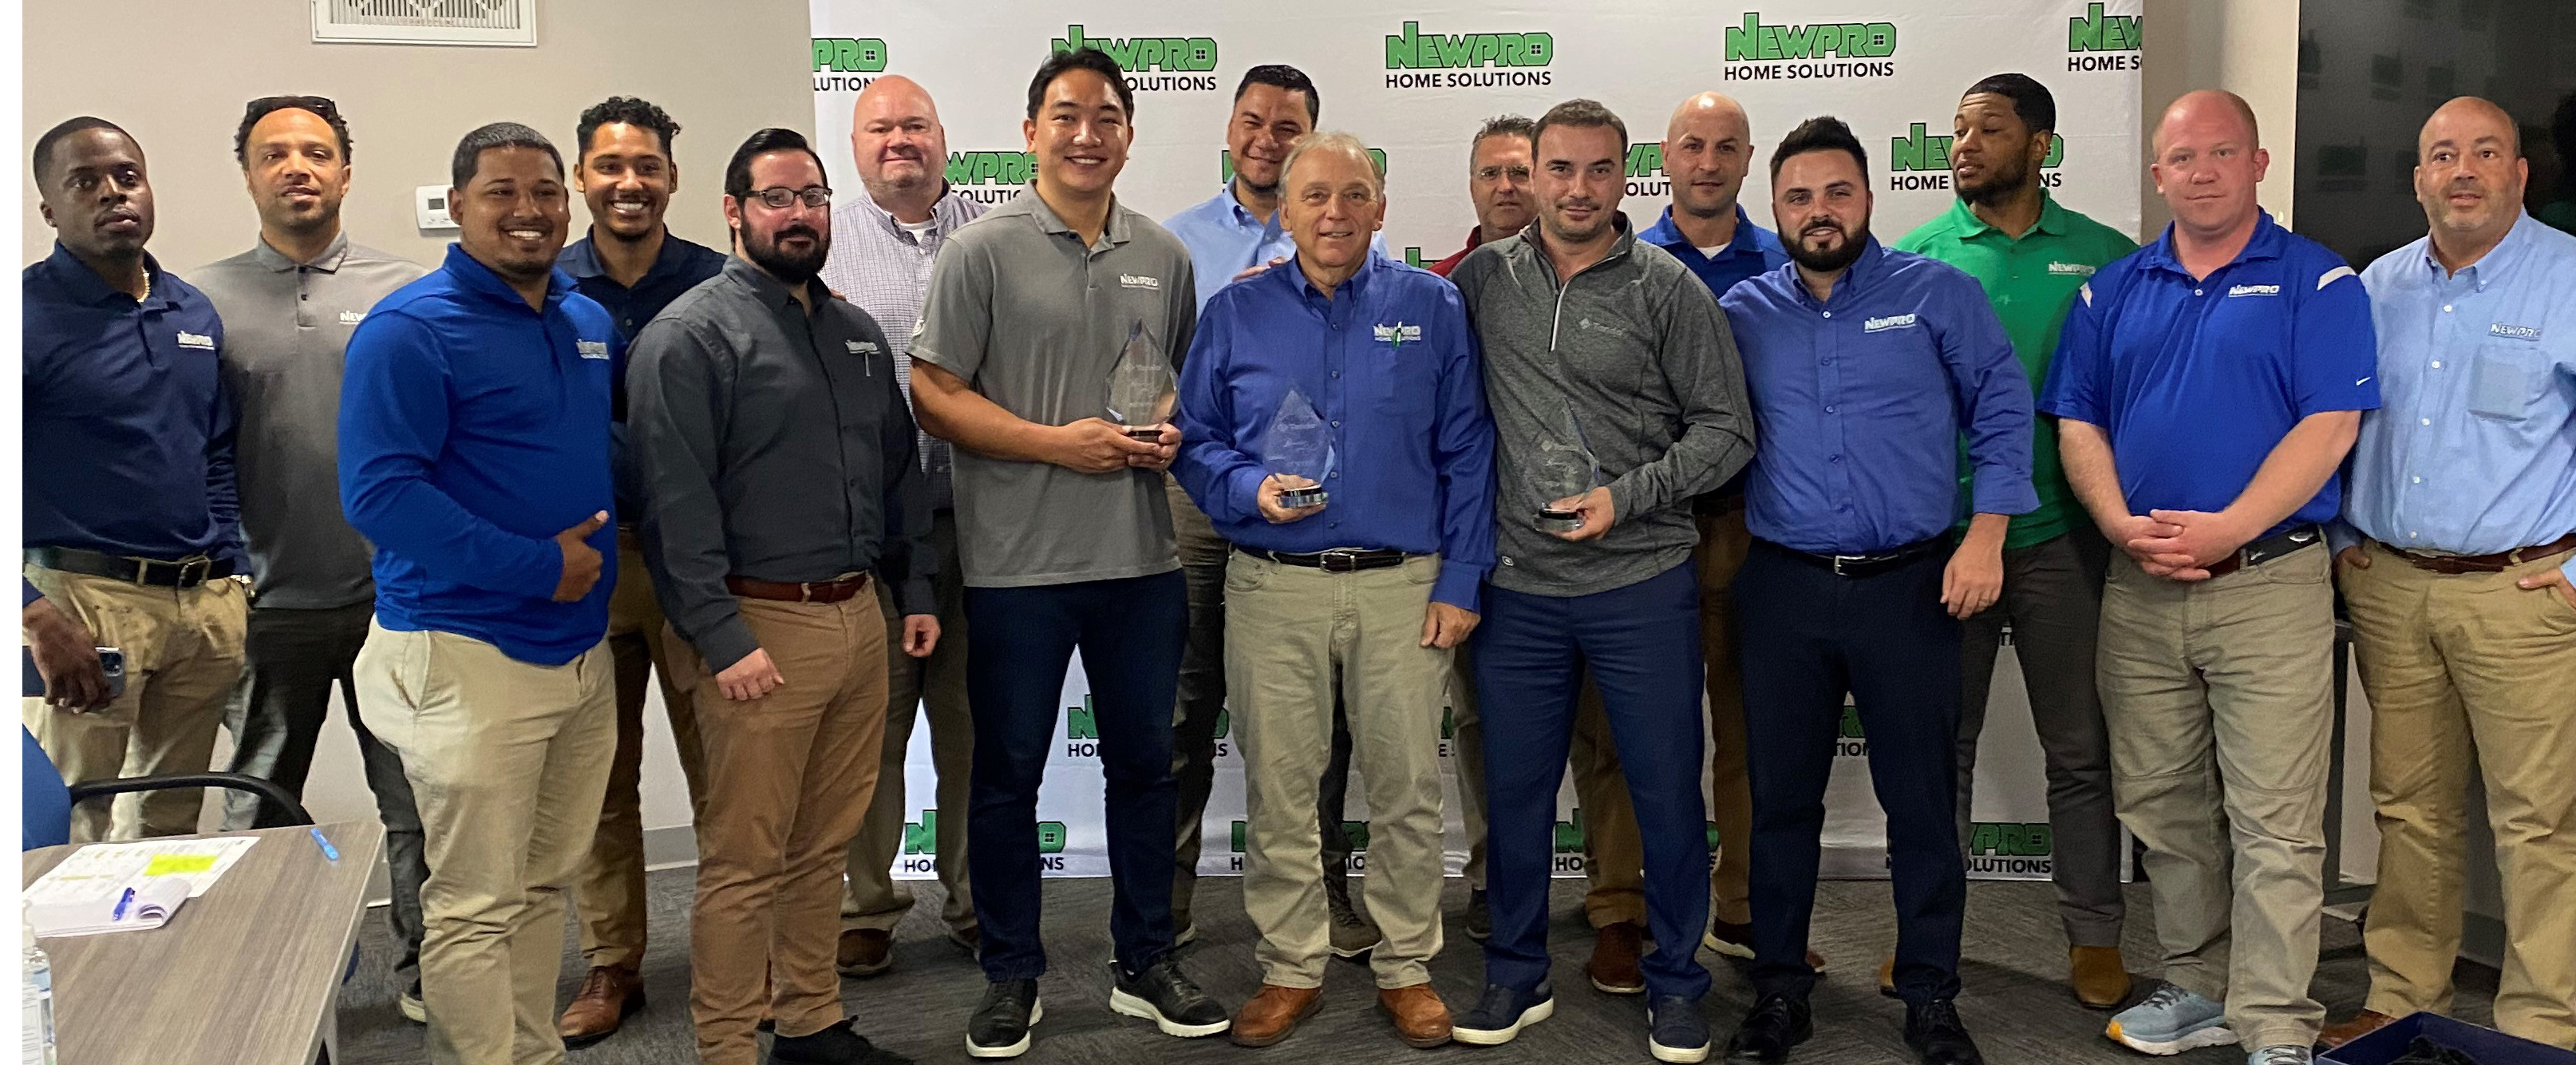 NEWPRO sales specialists were also recognized by Tando for exemplary sales and service: (center, left to right) Tony Yang, Rob Donadio and Enver Dibra display their awards.